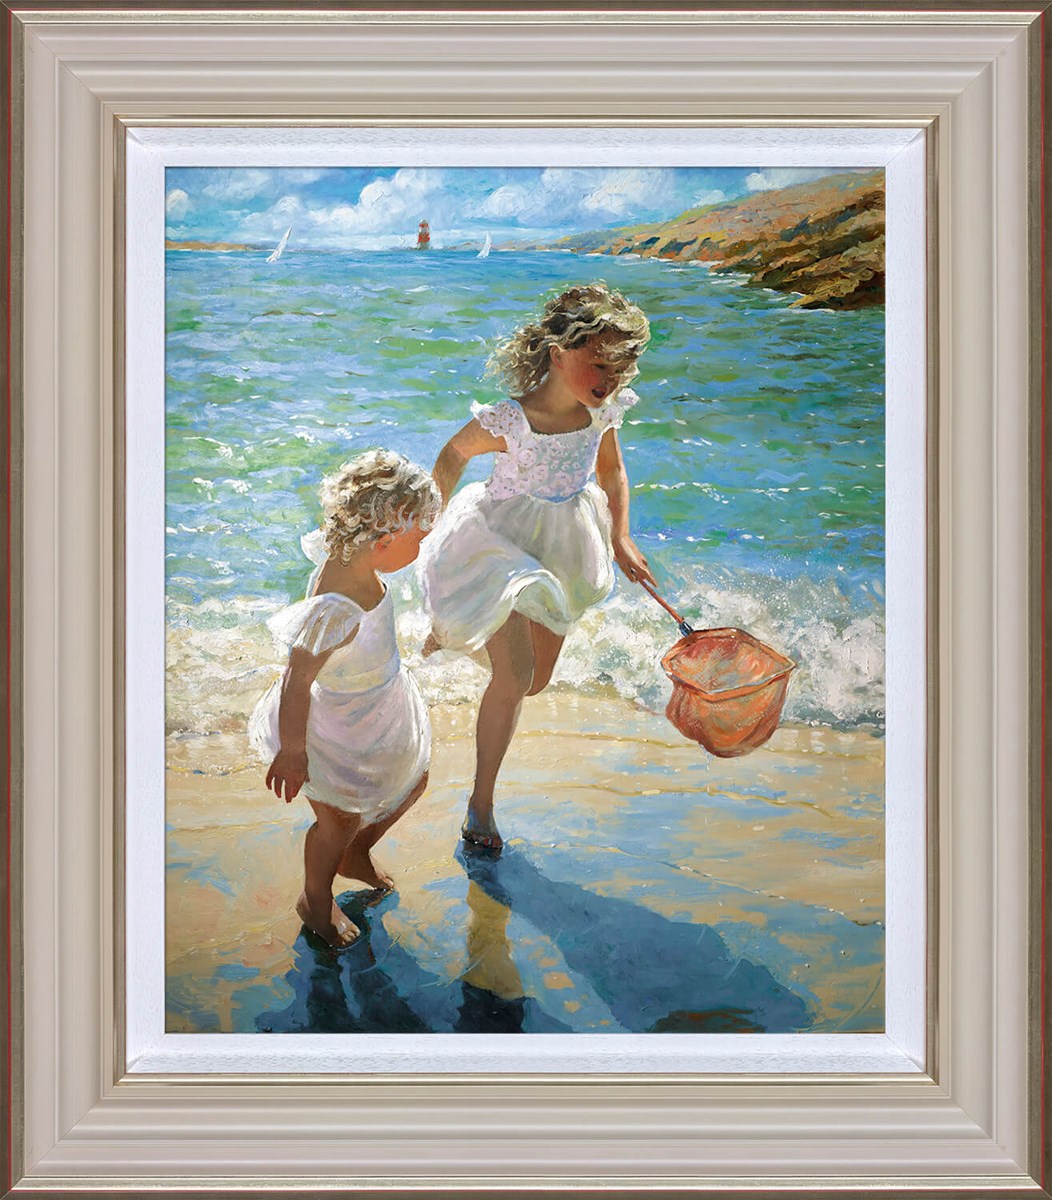 Carefree Happy Days limited edition print by Sherree Valentine Daines